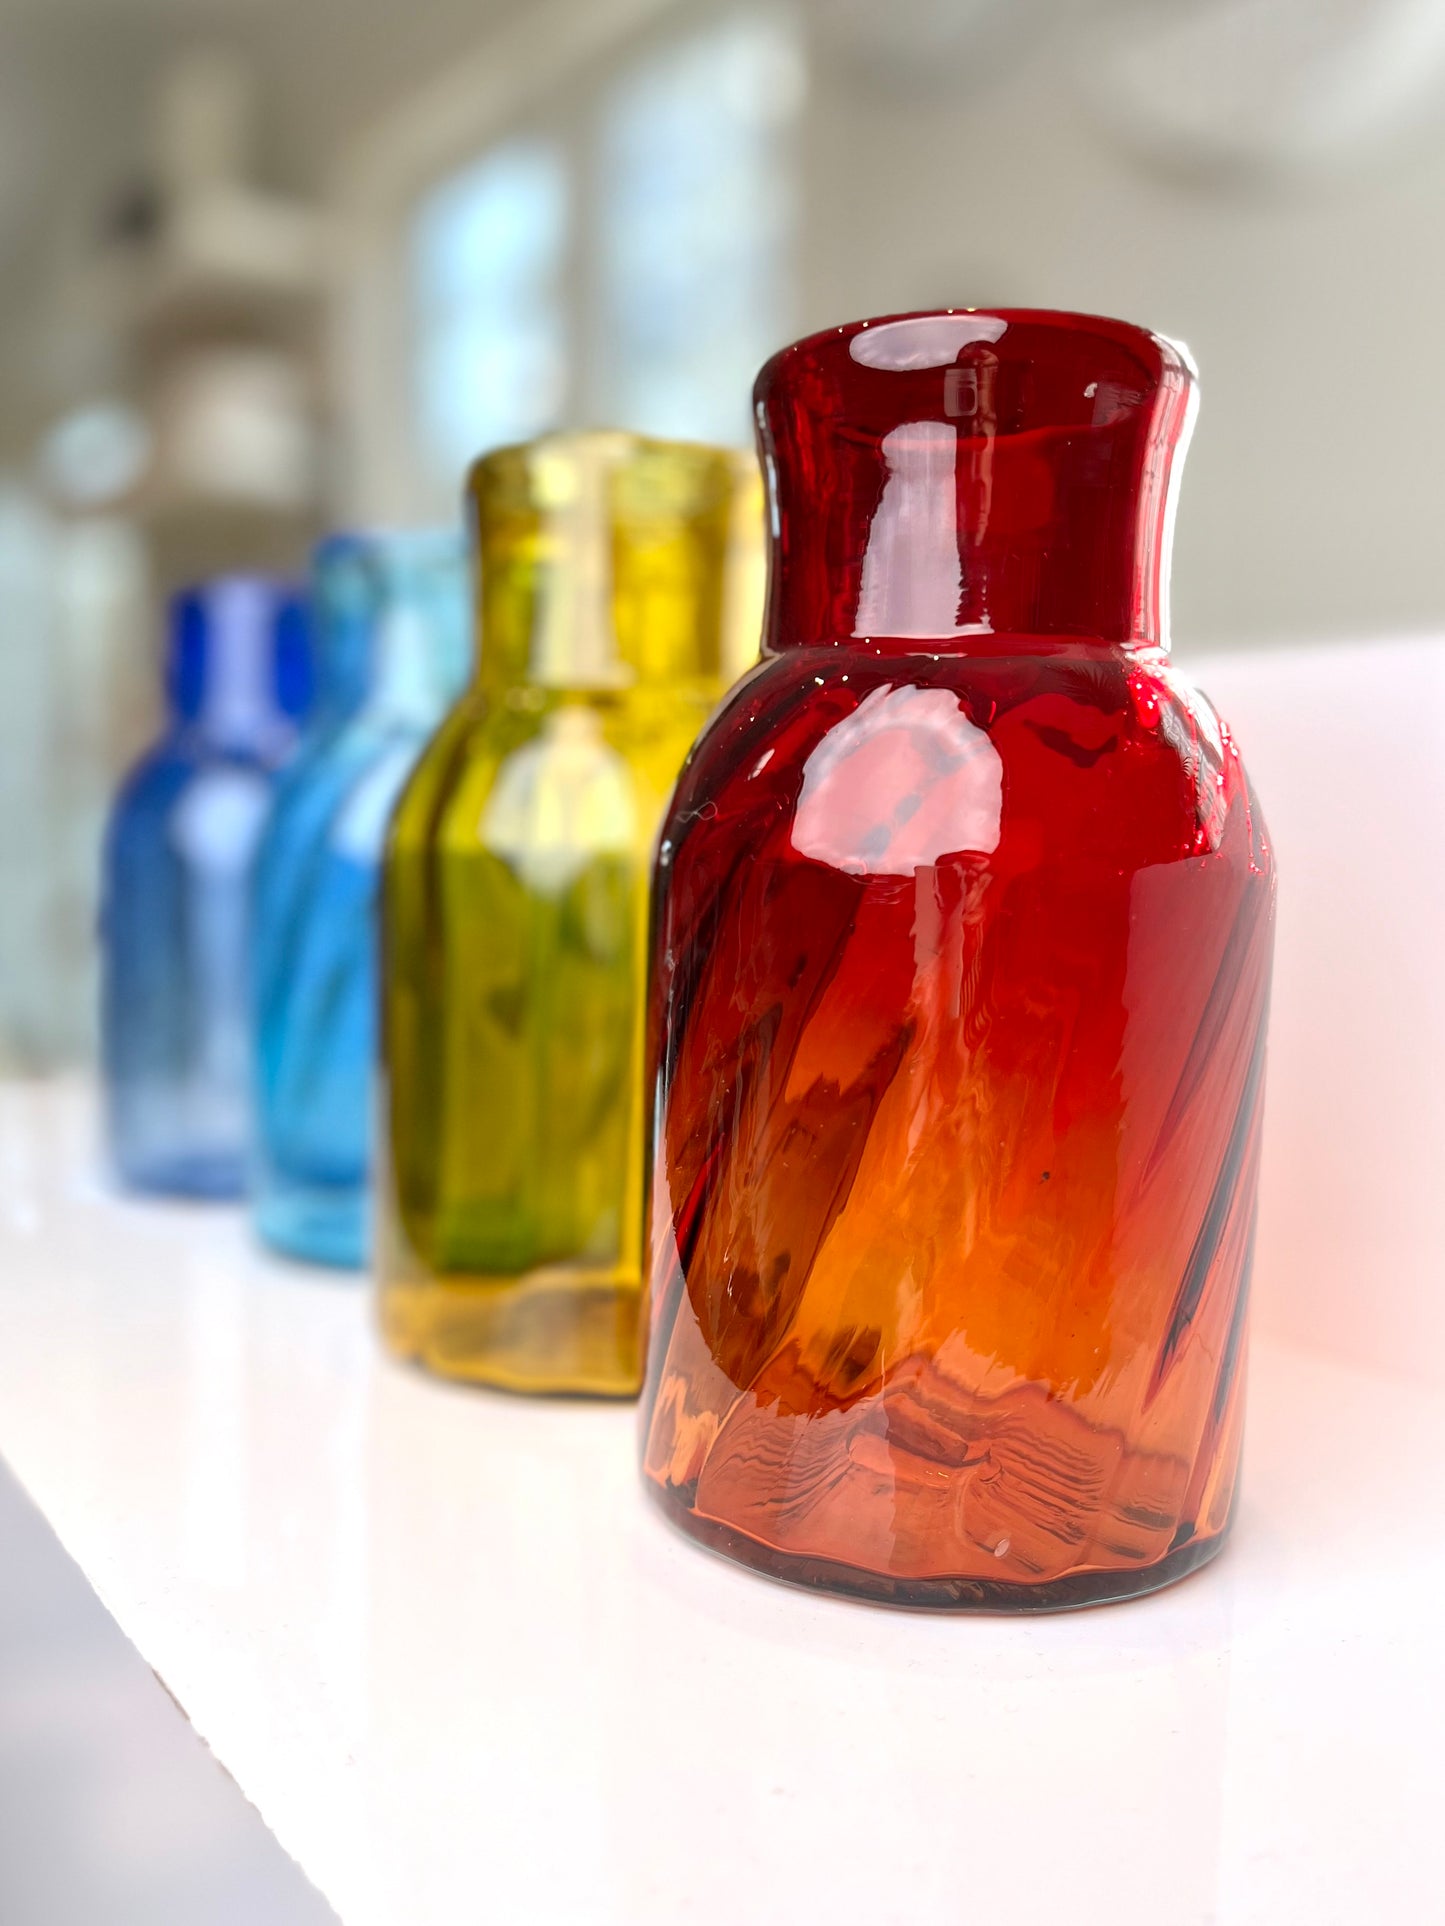 Colorful Glass Vase